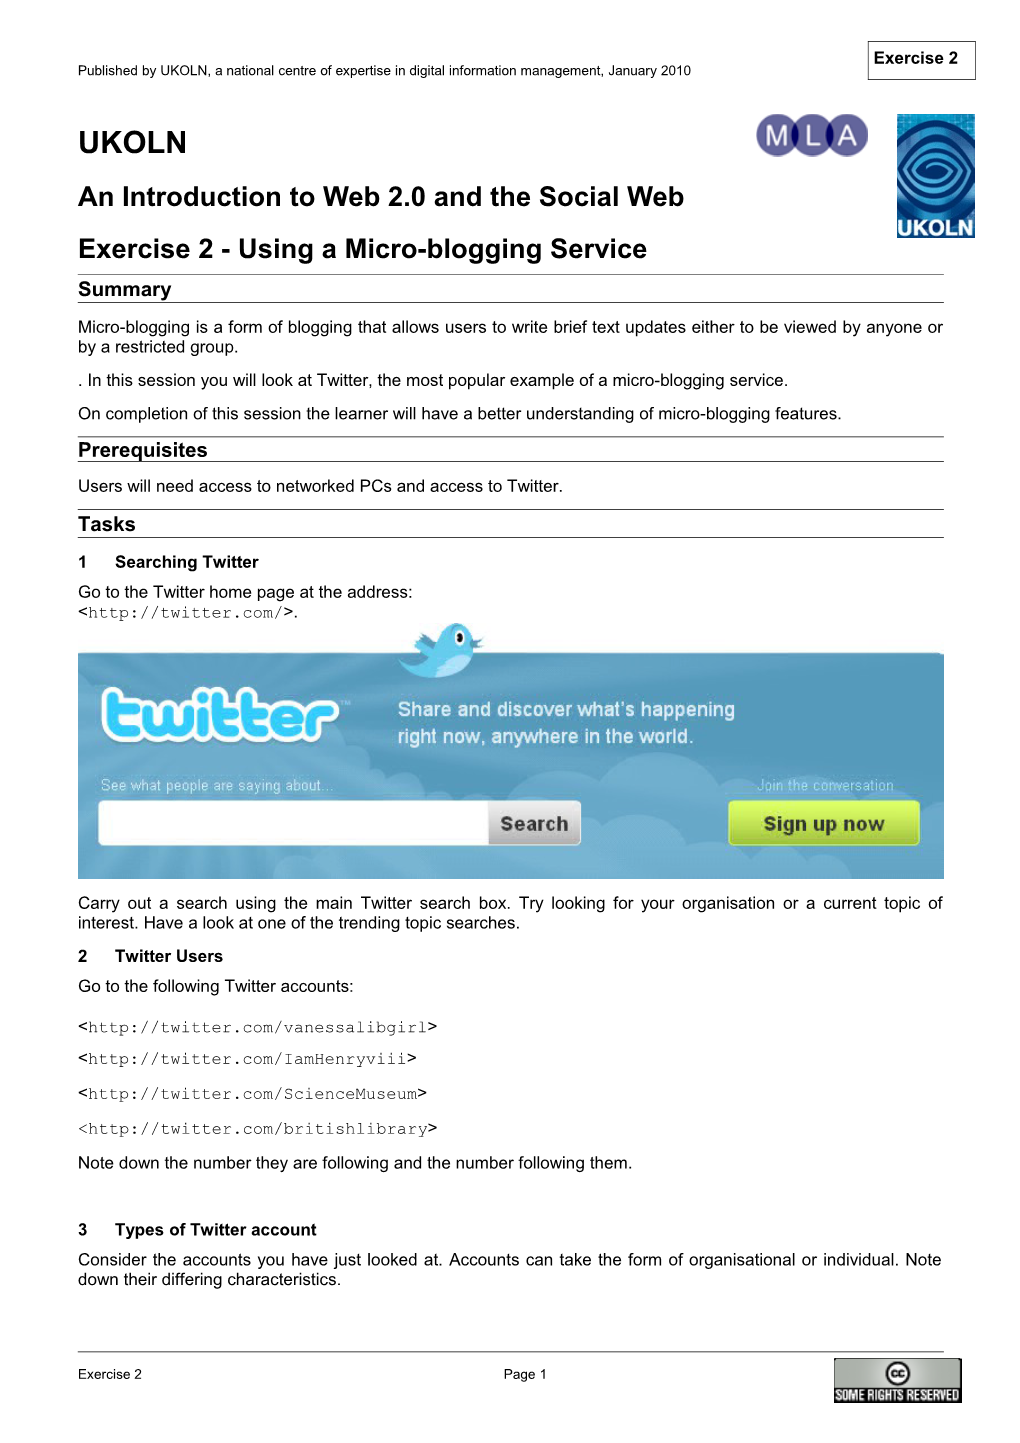 Exercise 2 - Using a Microblogging Service